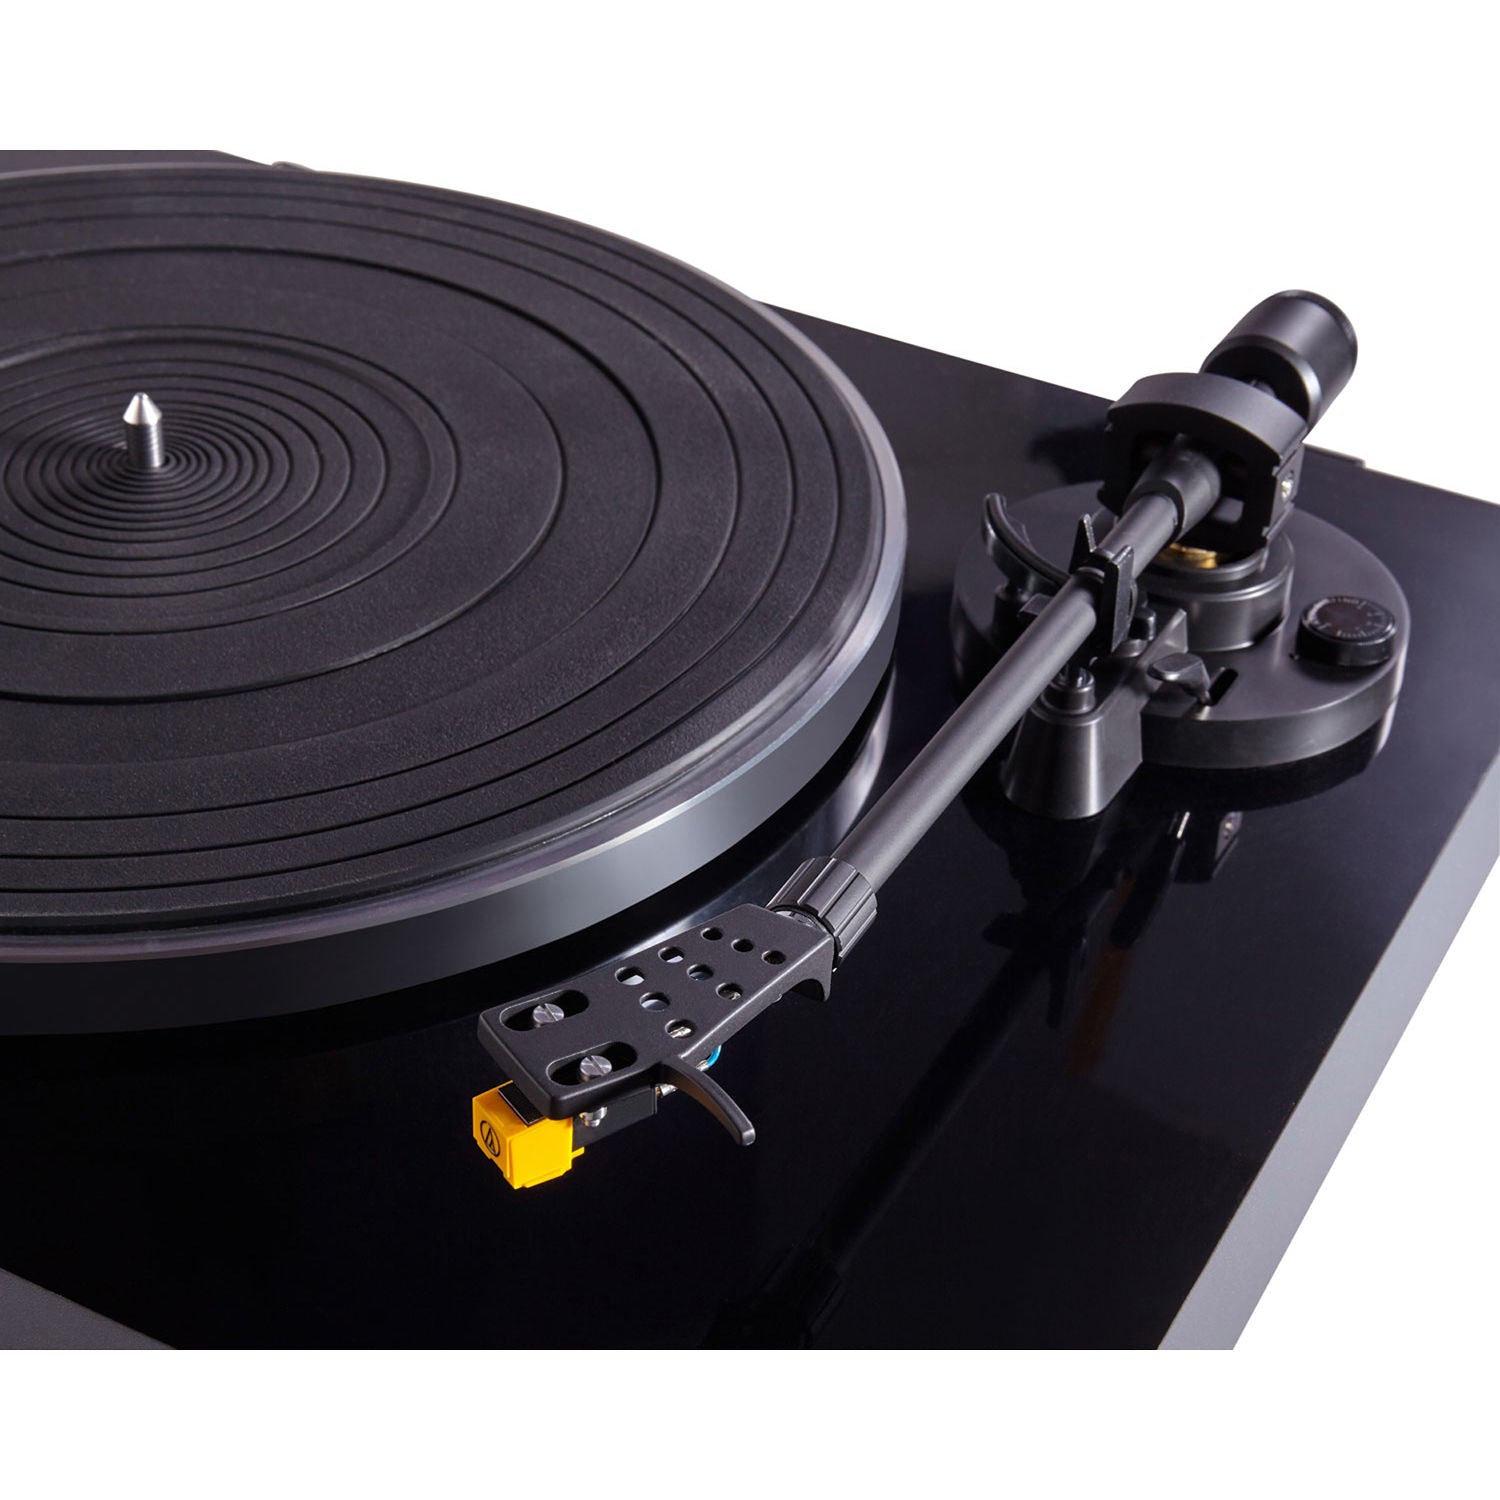 ELAC Miracord 50 Turntable